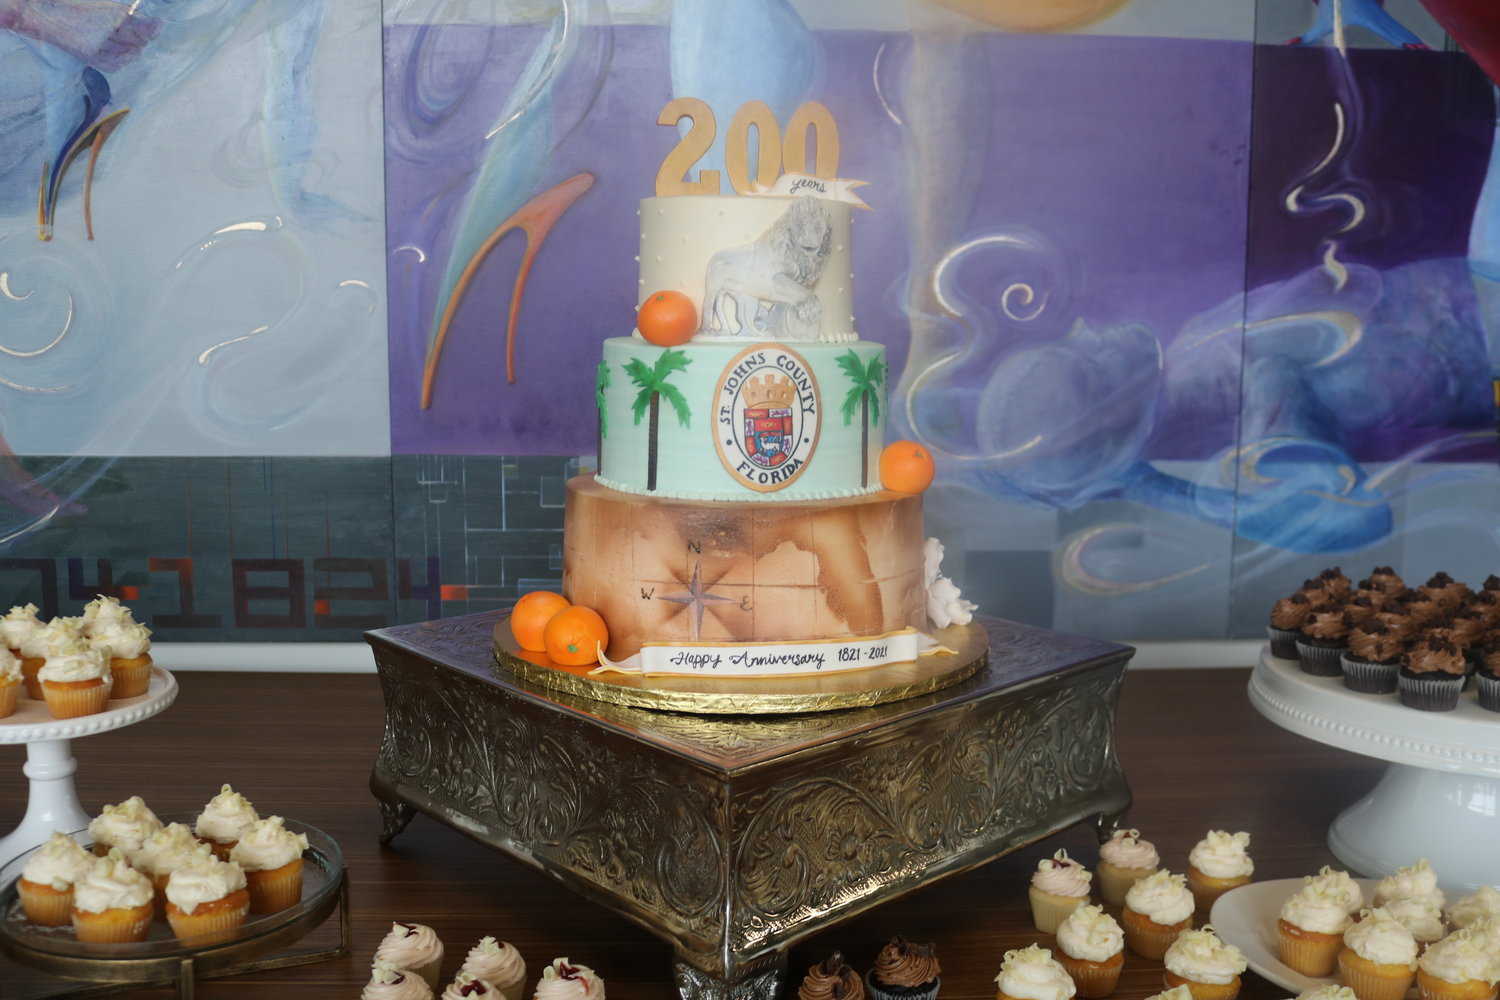 A cake celebrating the 200th anniversary of St. Johns County was brought out during grand opening festivities for the link on Wednesday, July 14.